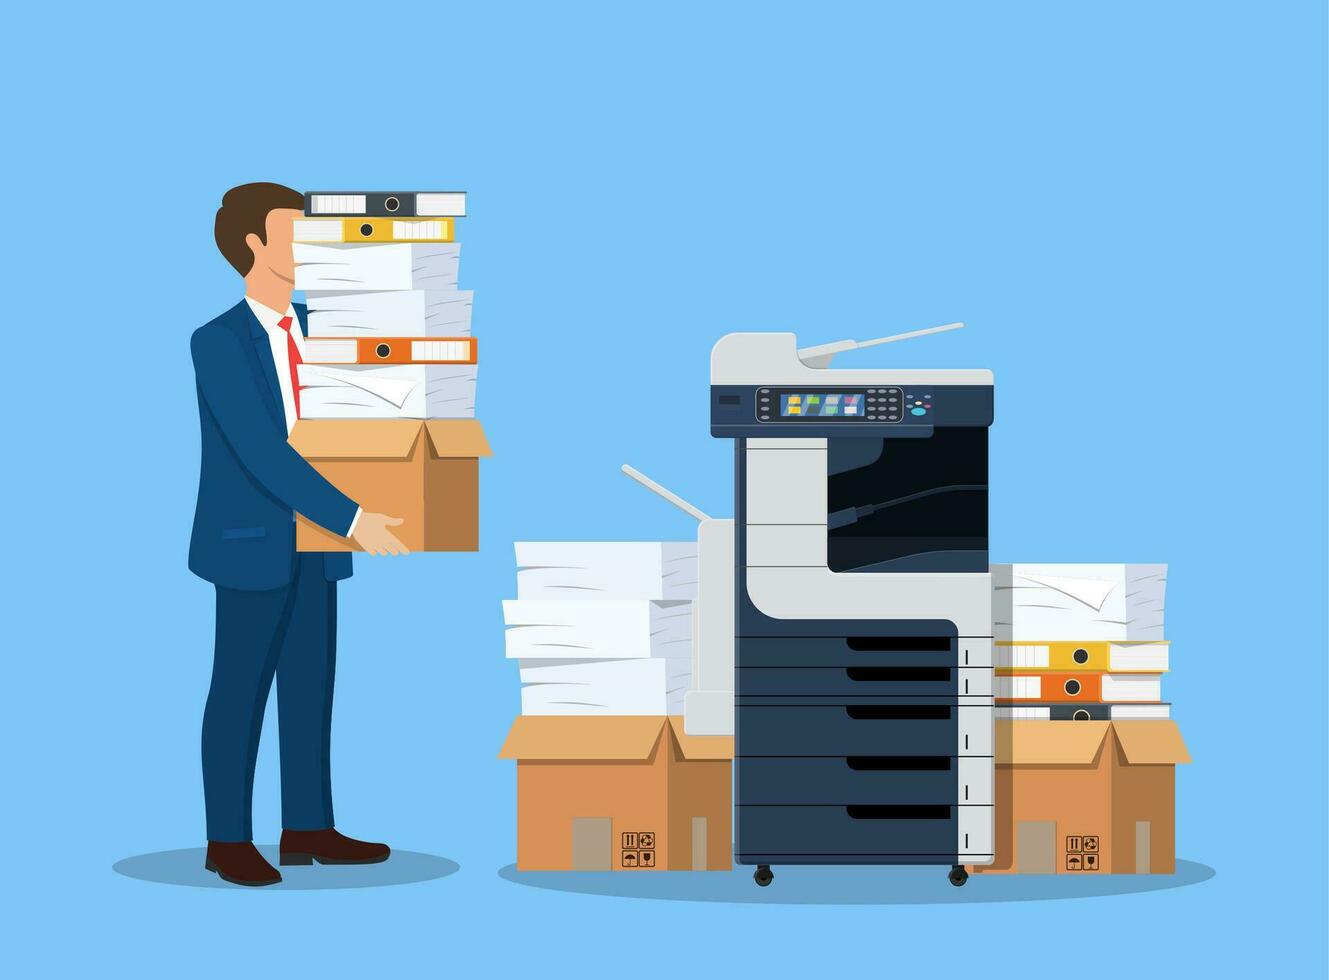 Stressed businessman holds pile of office documents. Overworked business man with stacks of papers. Office printer machine. Stress at work. Vector illustration in flat style